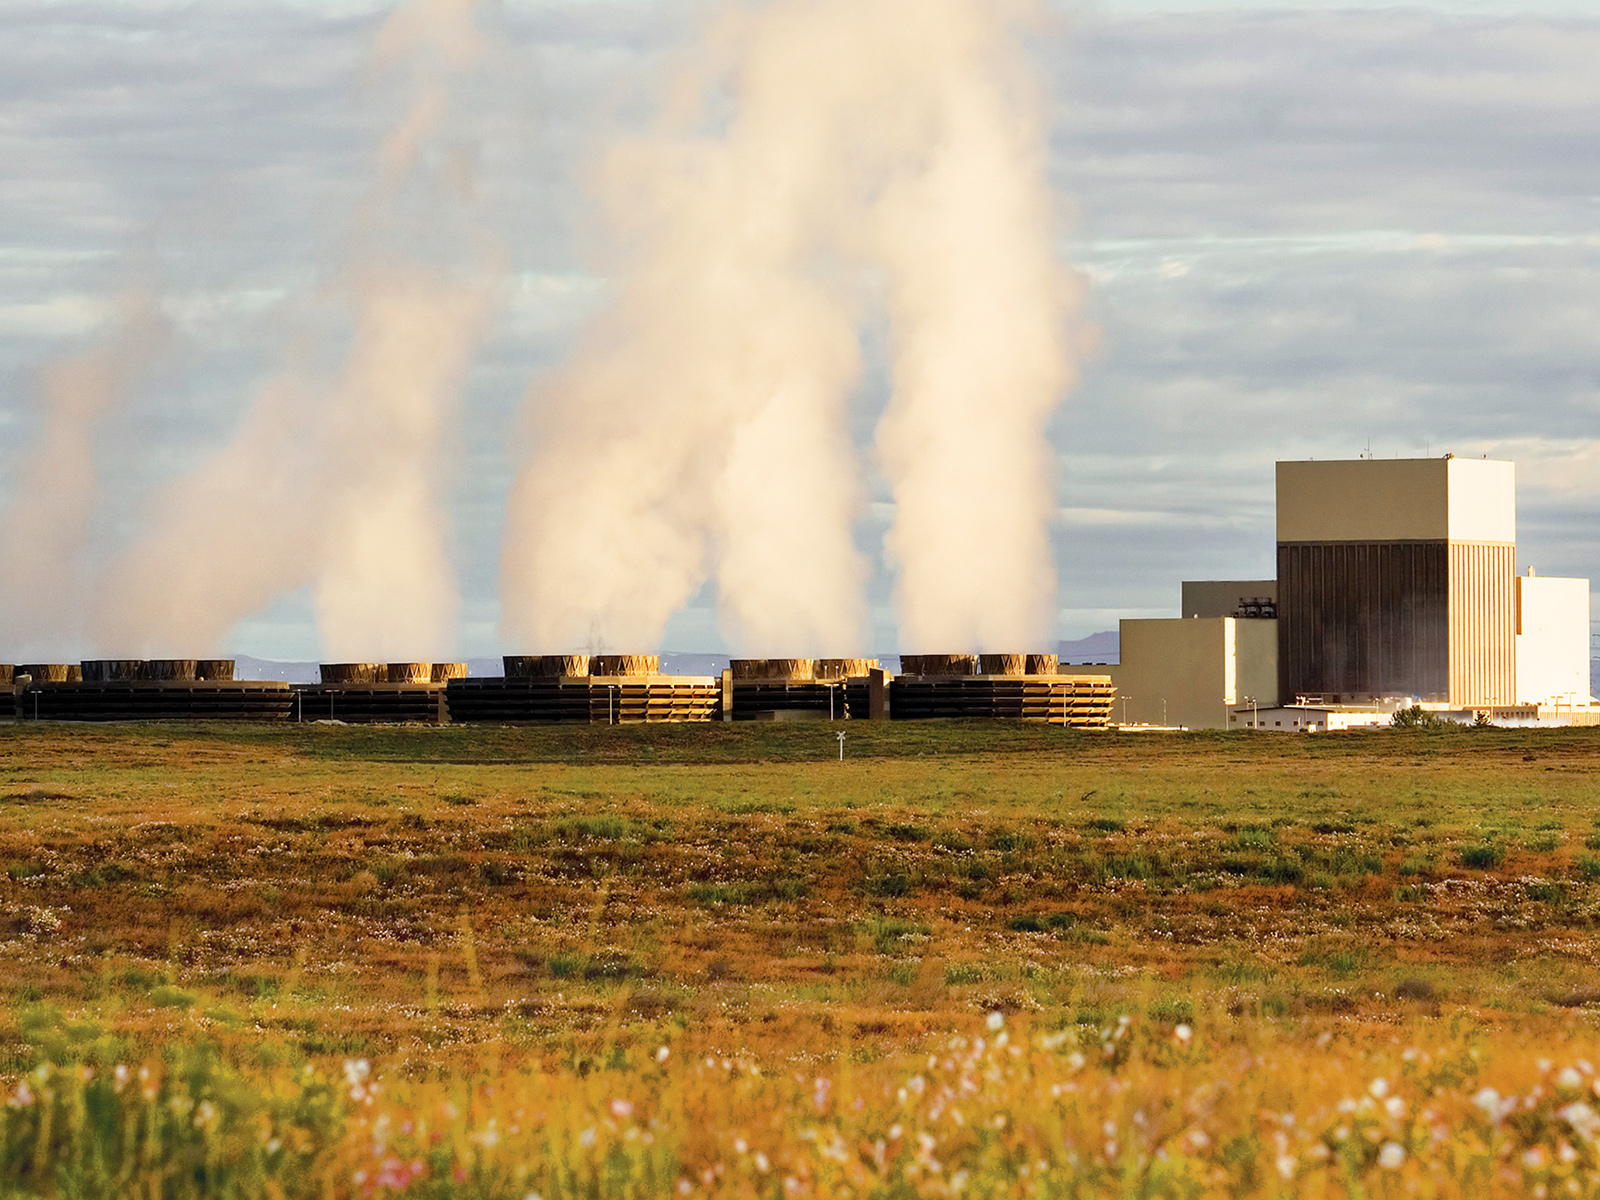 Washington State's only commercial nuclear power plant is located in the arid desert near Richland.  The buildings release clouds of steam when hot air is released.